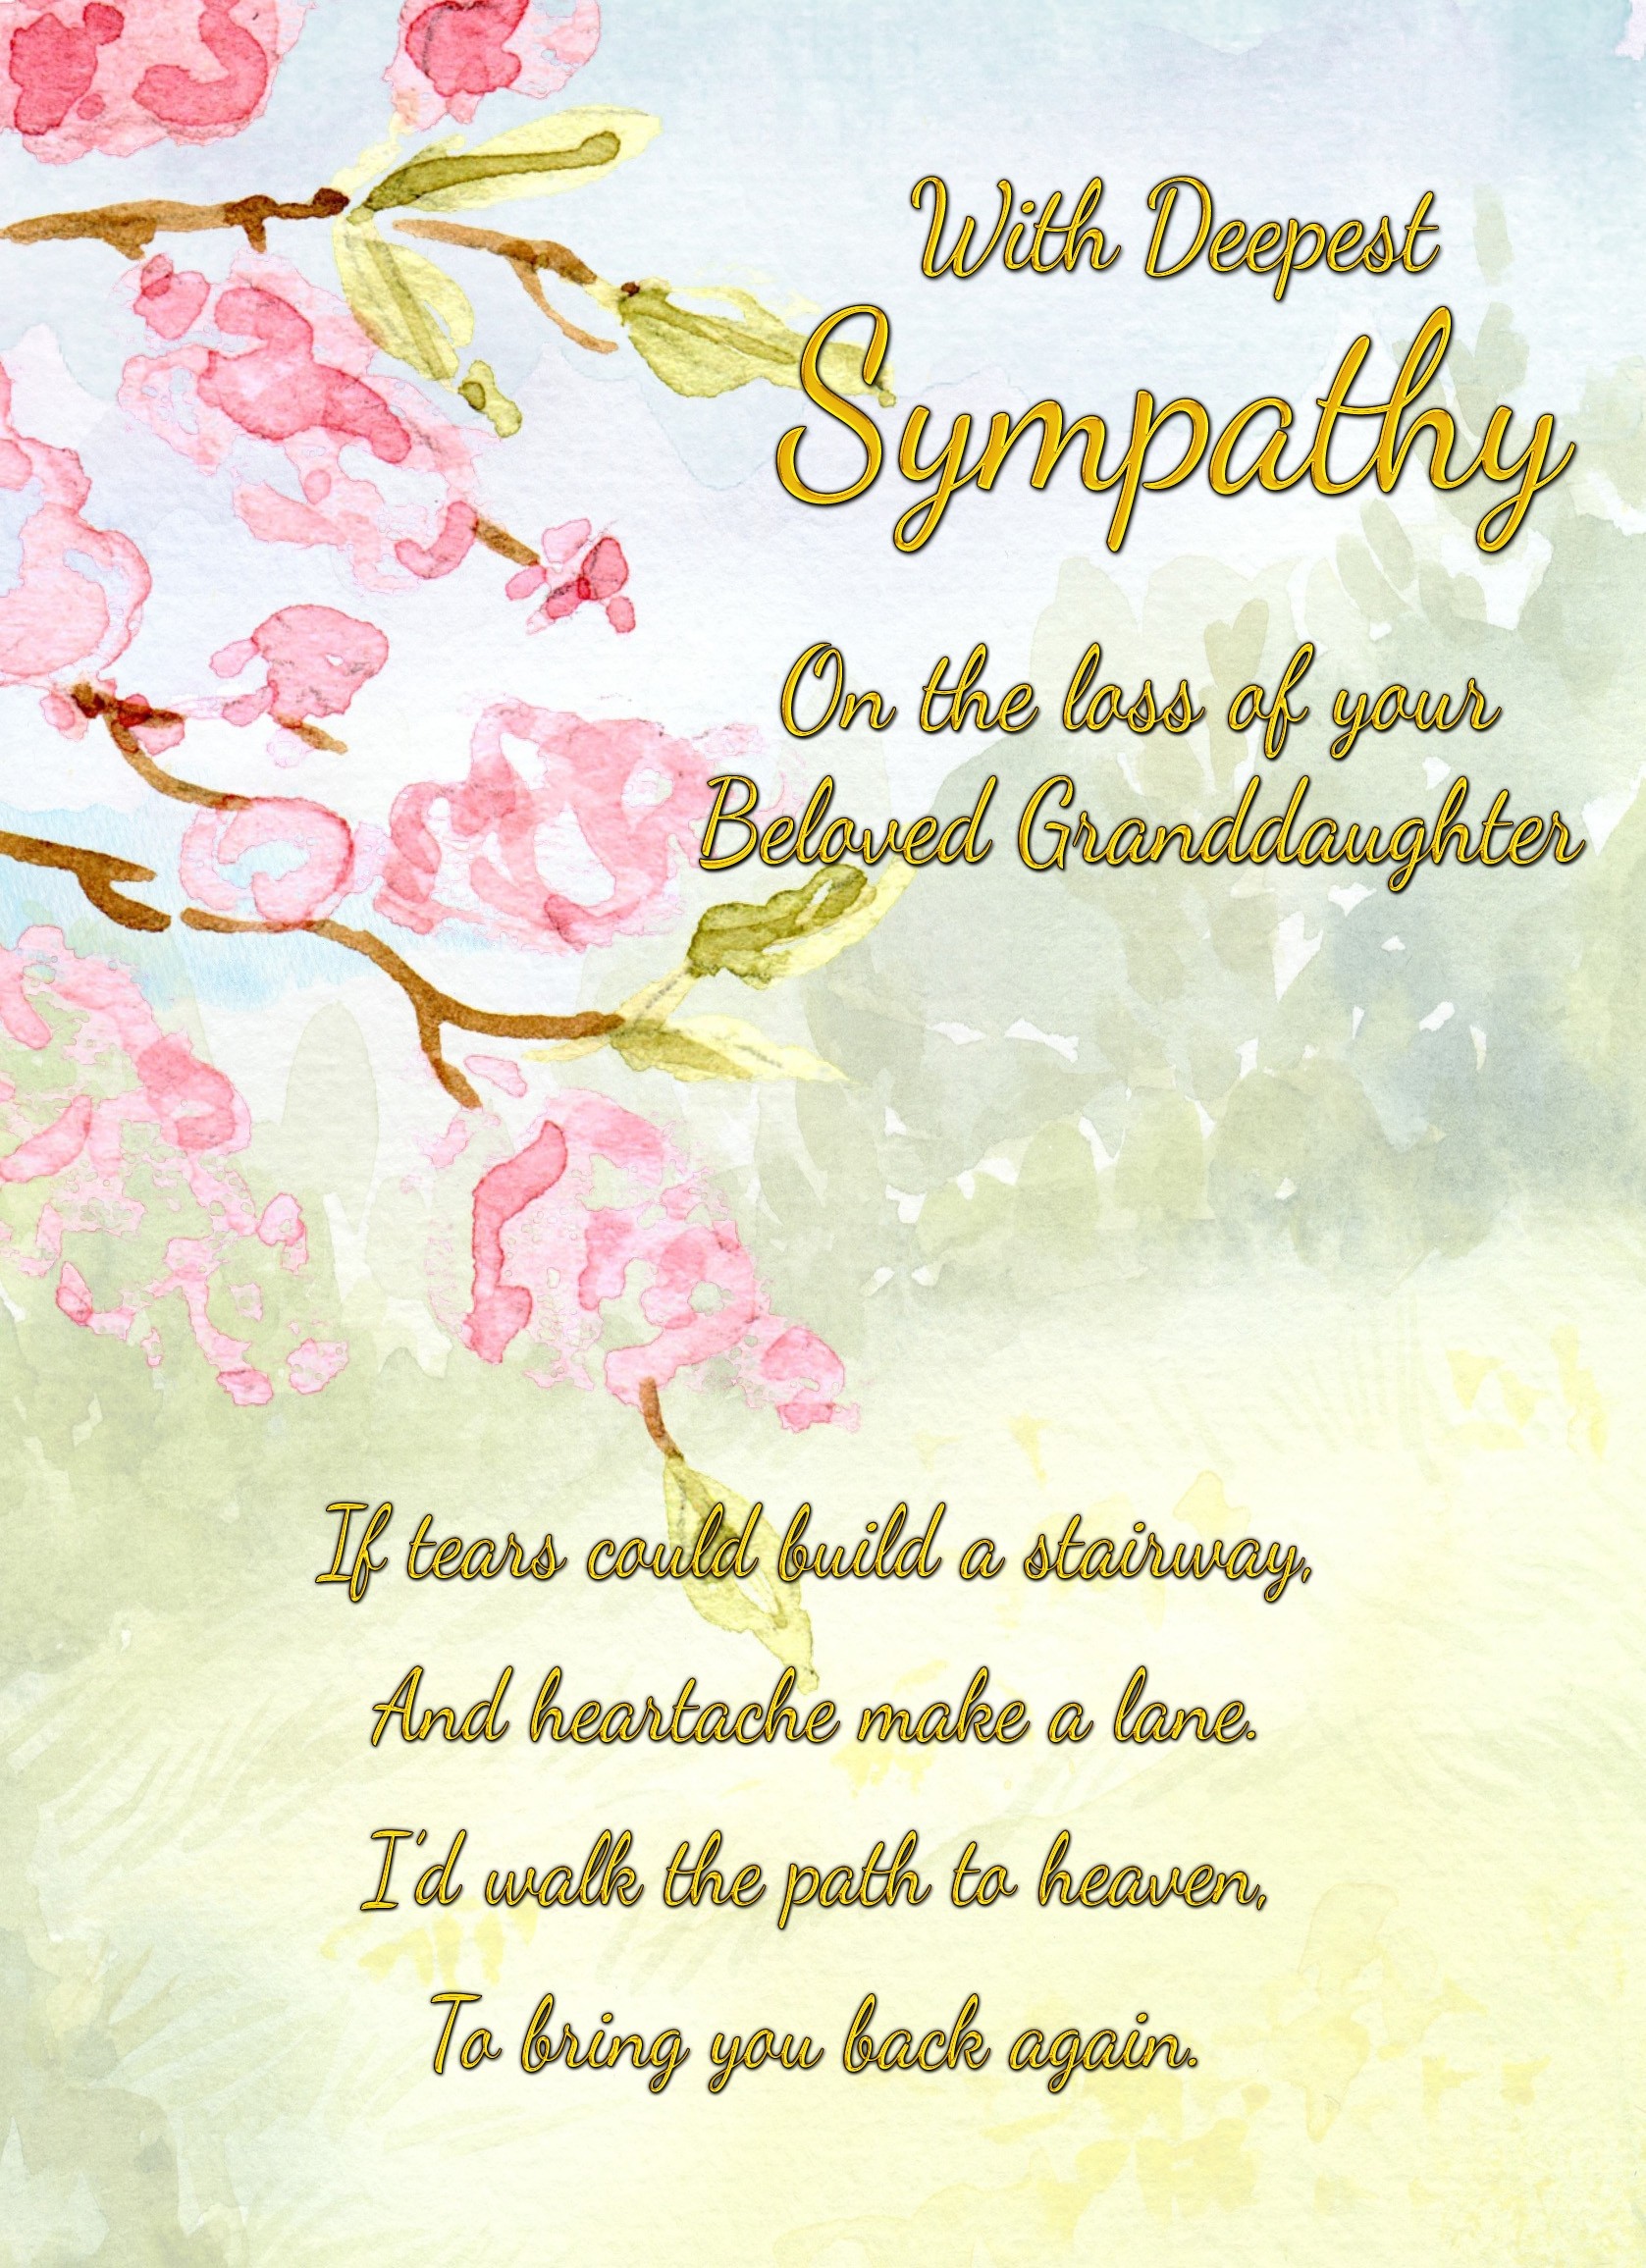 Sympathy Bereavement Card (With Deepest Sympathy, Beloved Granddaughter)